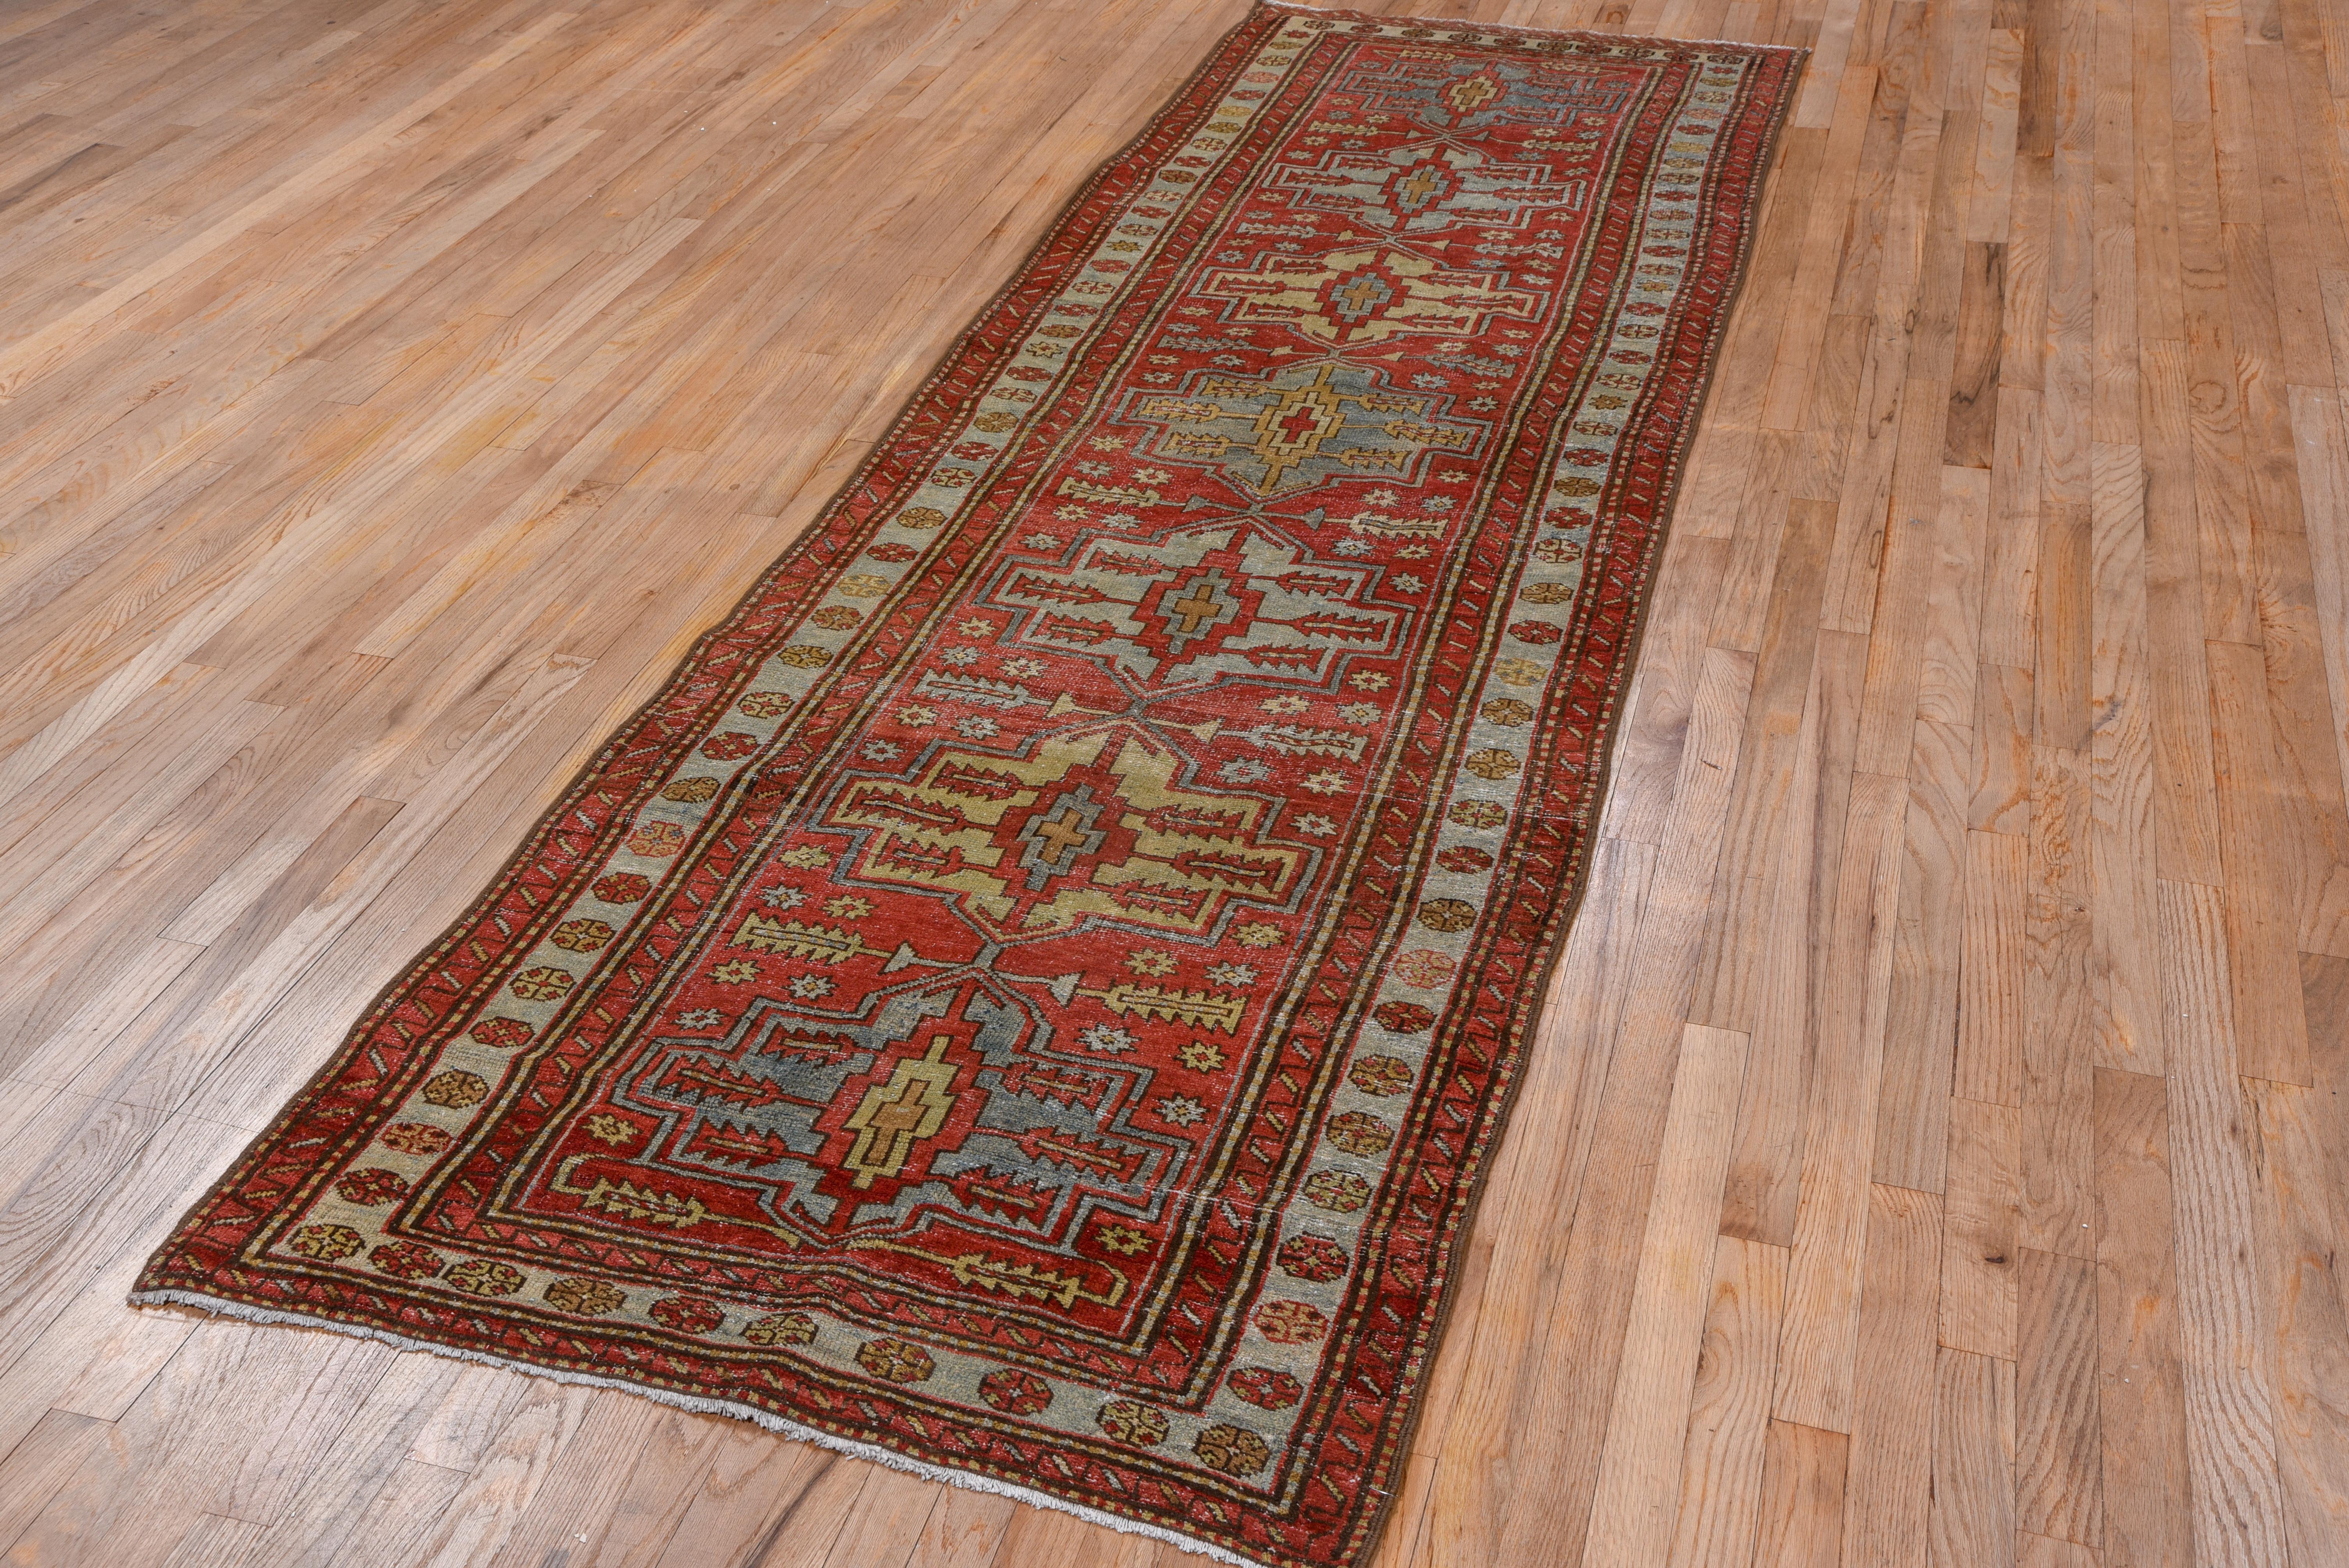 Seven Karaja-style octogramme medallions march up the madder red field of this semi-geometric NW Persian rustic wide runner while the narrow ecru main border presents disjoint octagon rosettes.